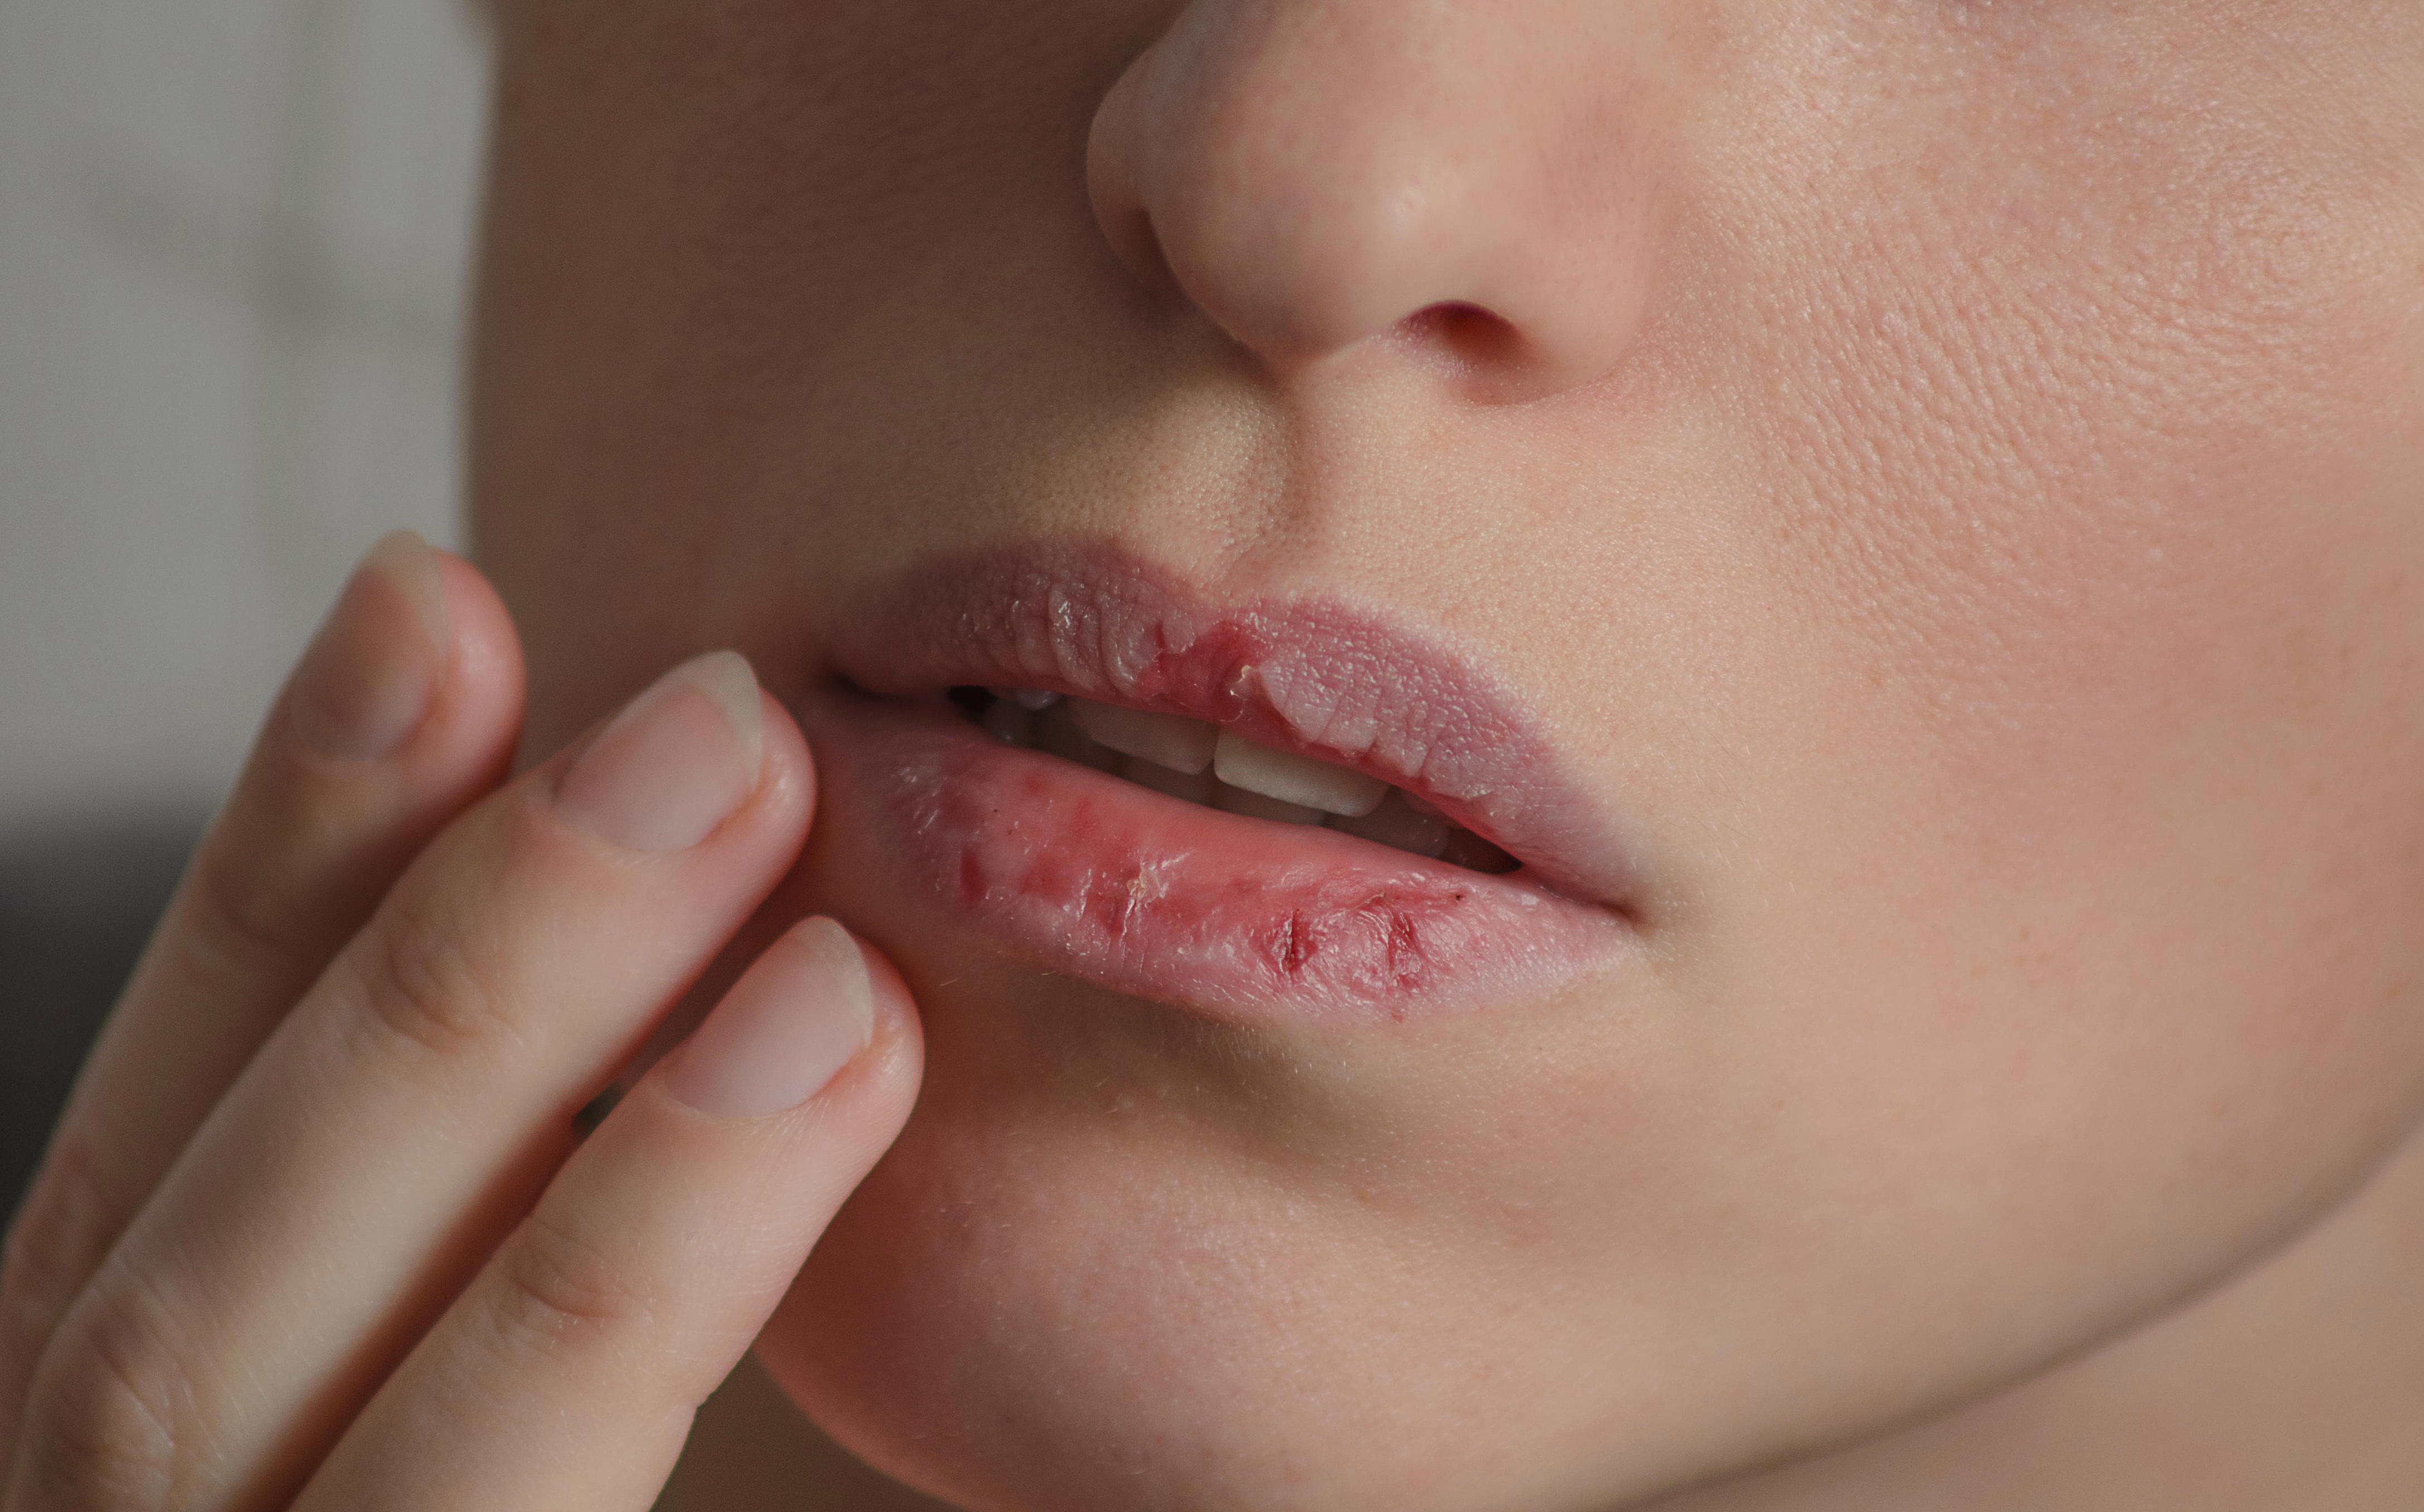 dealing with dry lips? there are many possible reasons.